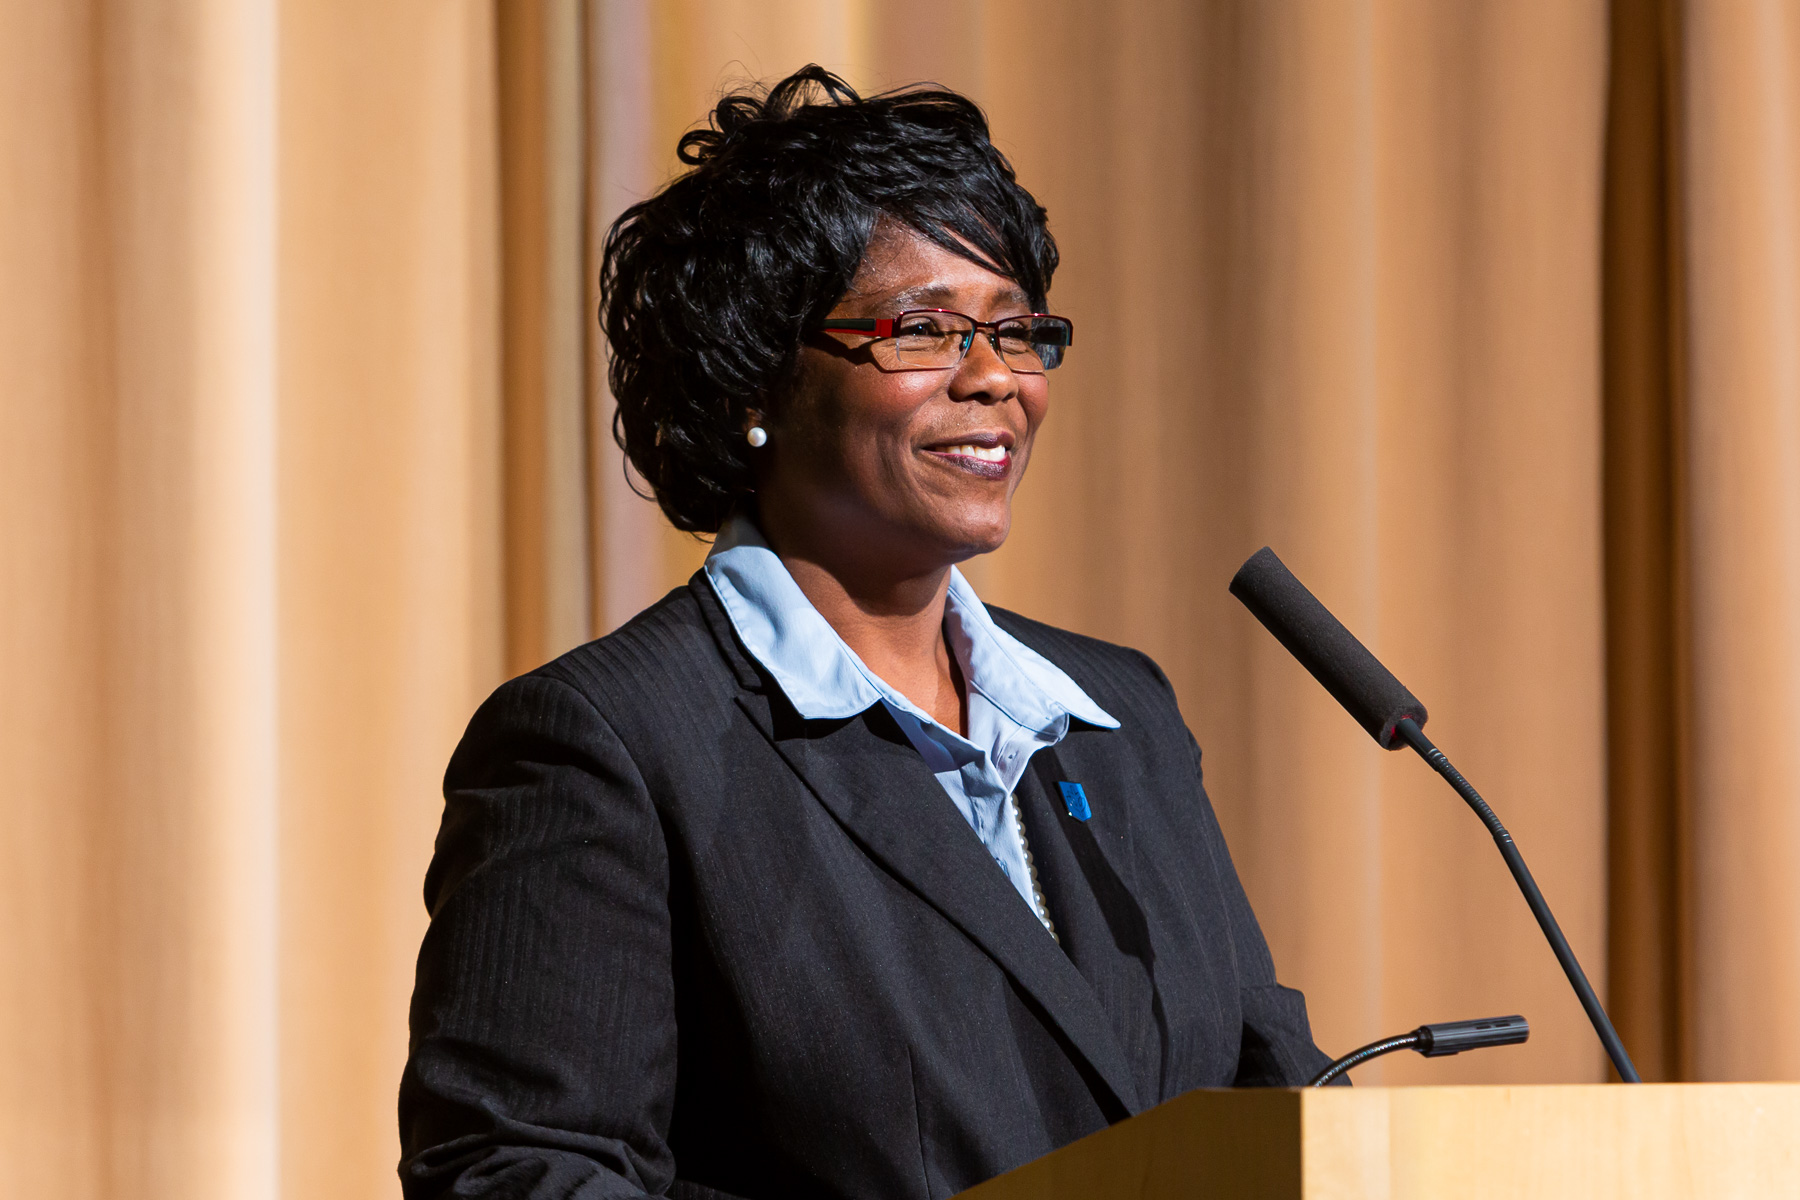 Phyllis Gregg, senior executive assistant to the president, welcomed guests to the Rev. Dr. Martin Luther King, Jr. prayer breakfast. The event was hosted by the Office of Institutional Diversity & Equity, in the student center or DePaul’s Lincoln Park Campus. (DePaul University/Randall Spriggs)